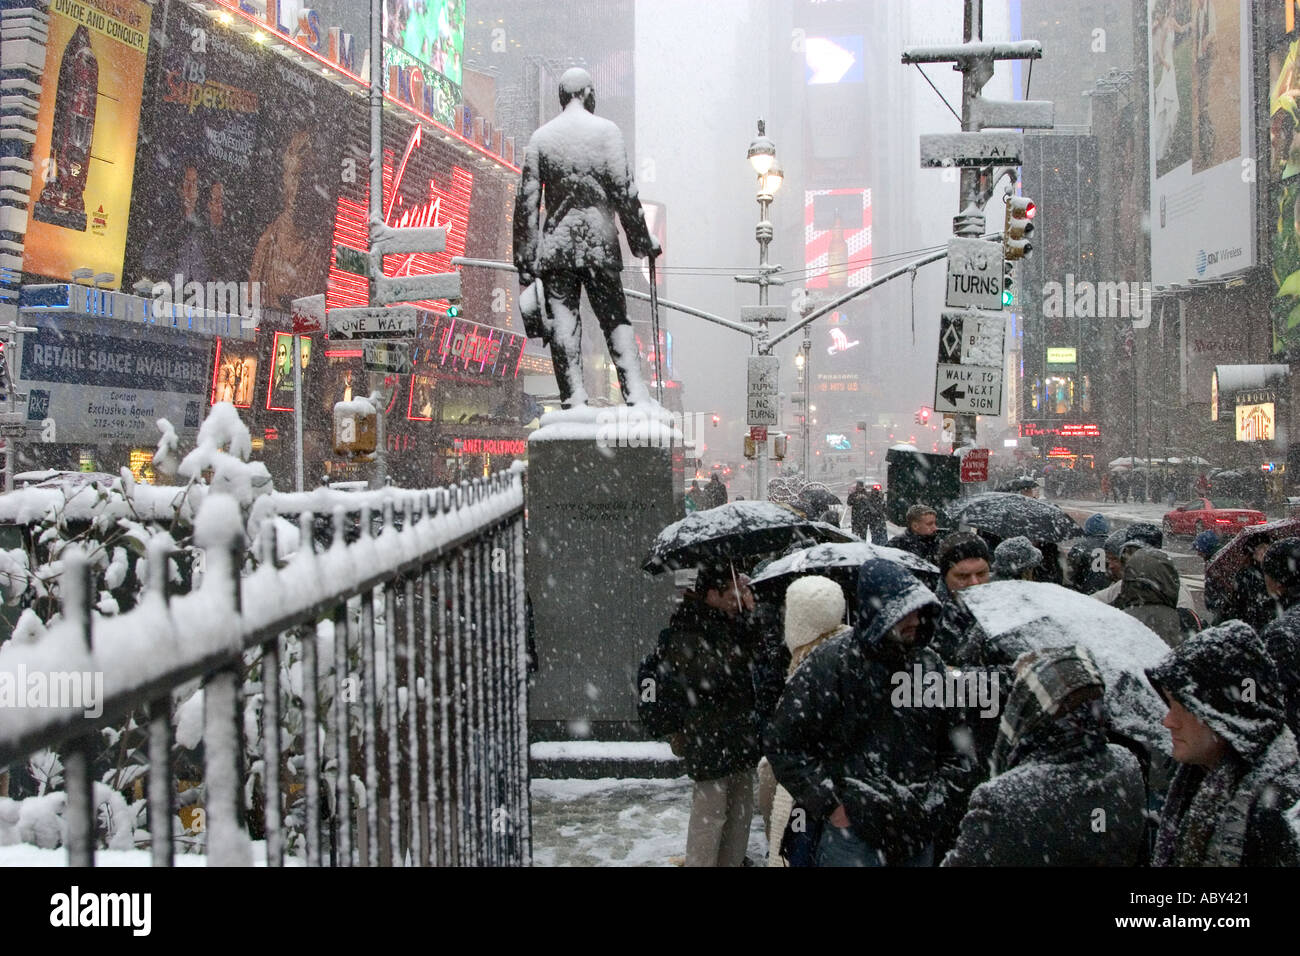 Theatre goers seeking discount tickets TCKTS wait in a snowstorm at 47th Street in Times Square Stock Photo